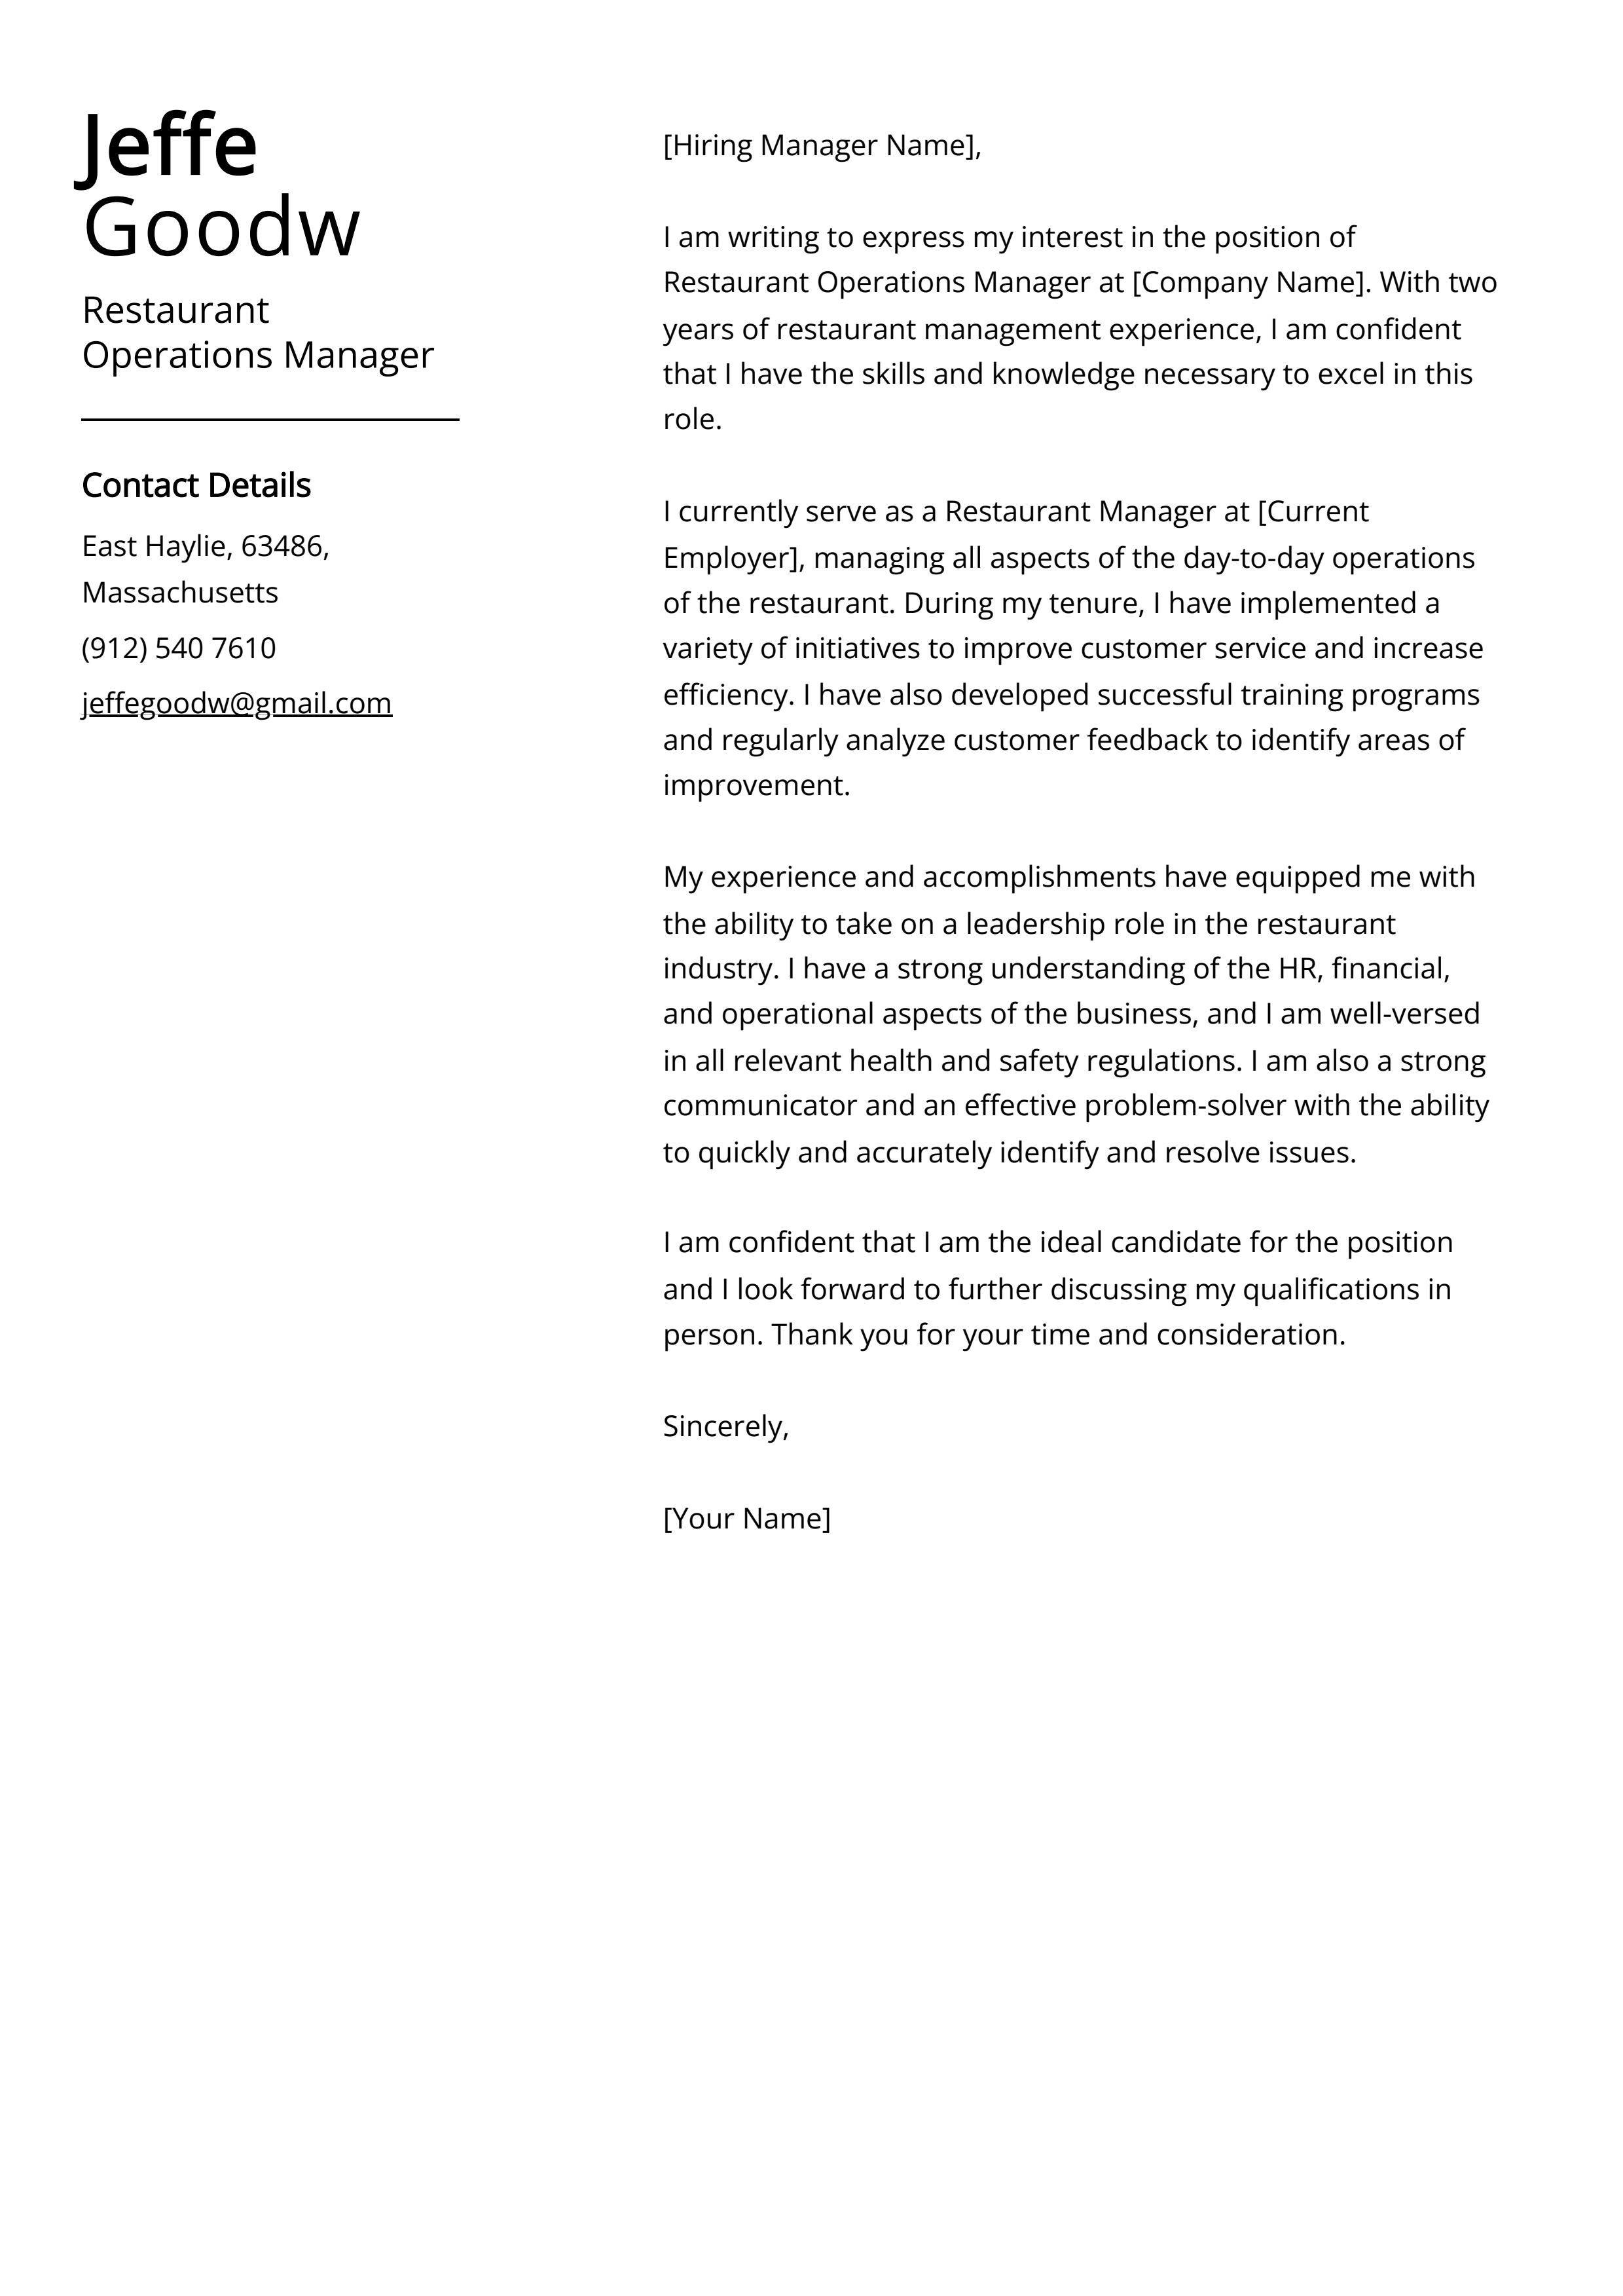 Restaurant Operations Manager Cover Letter Example